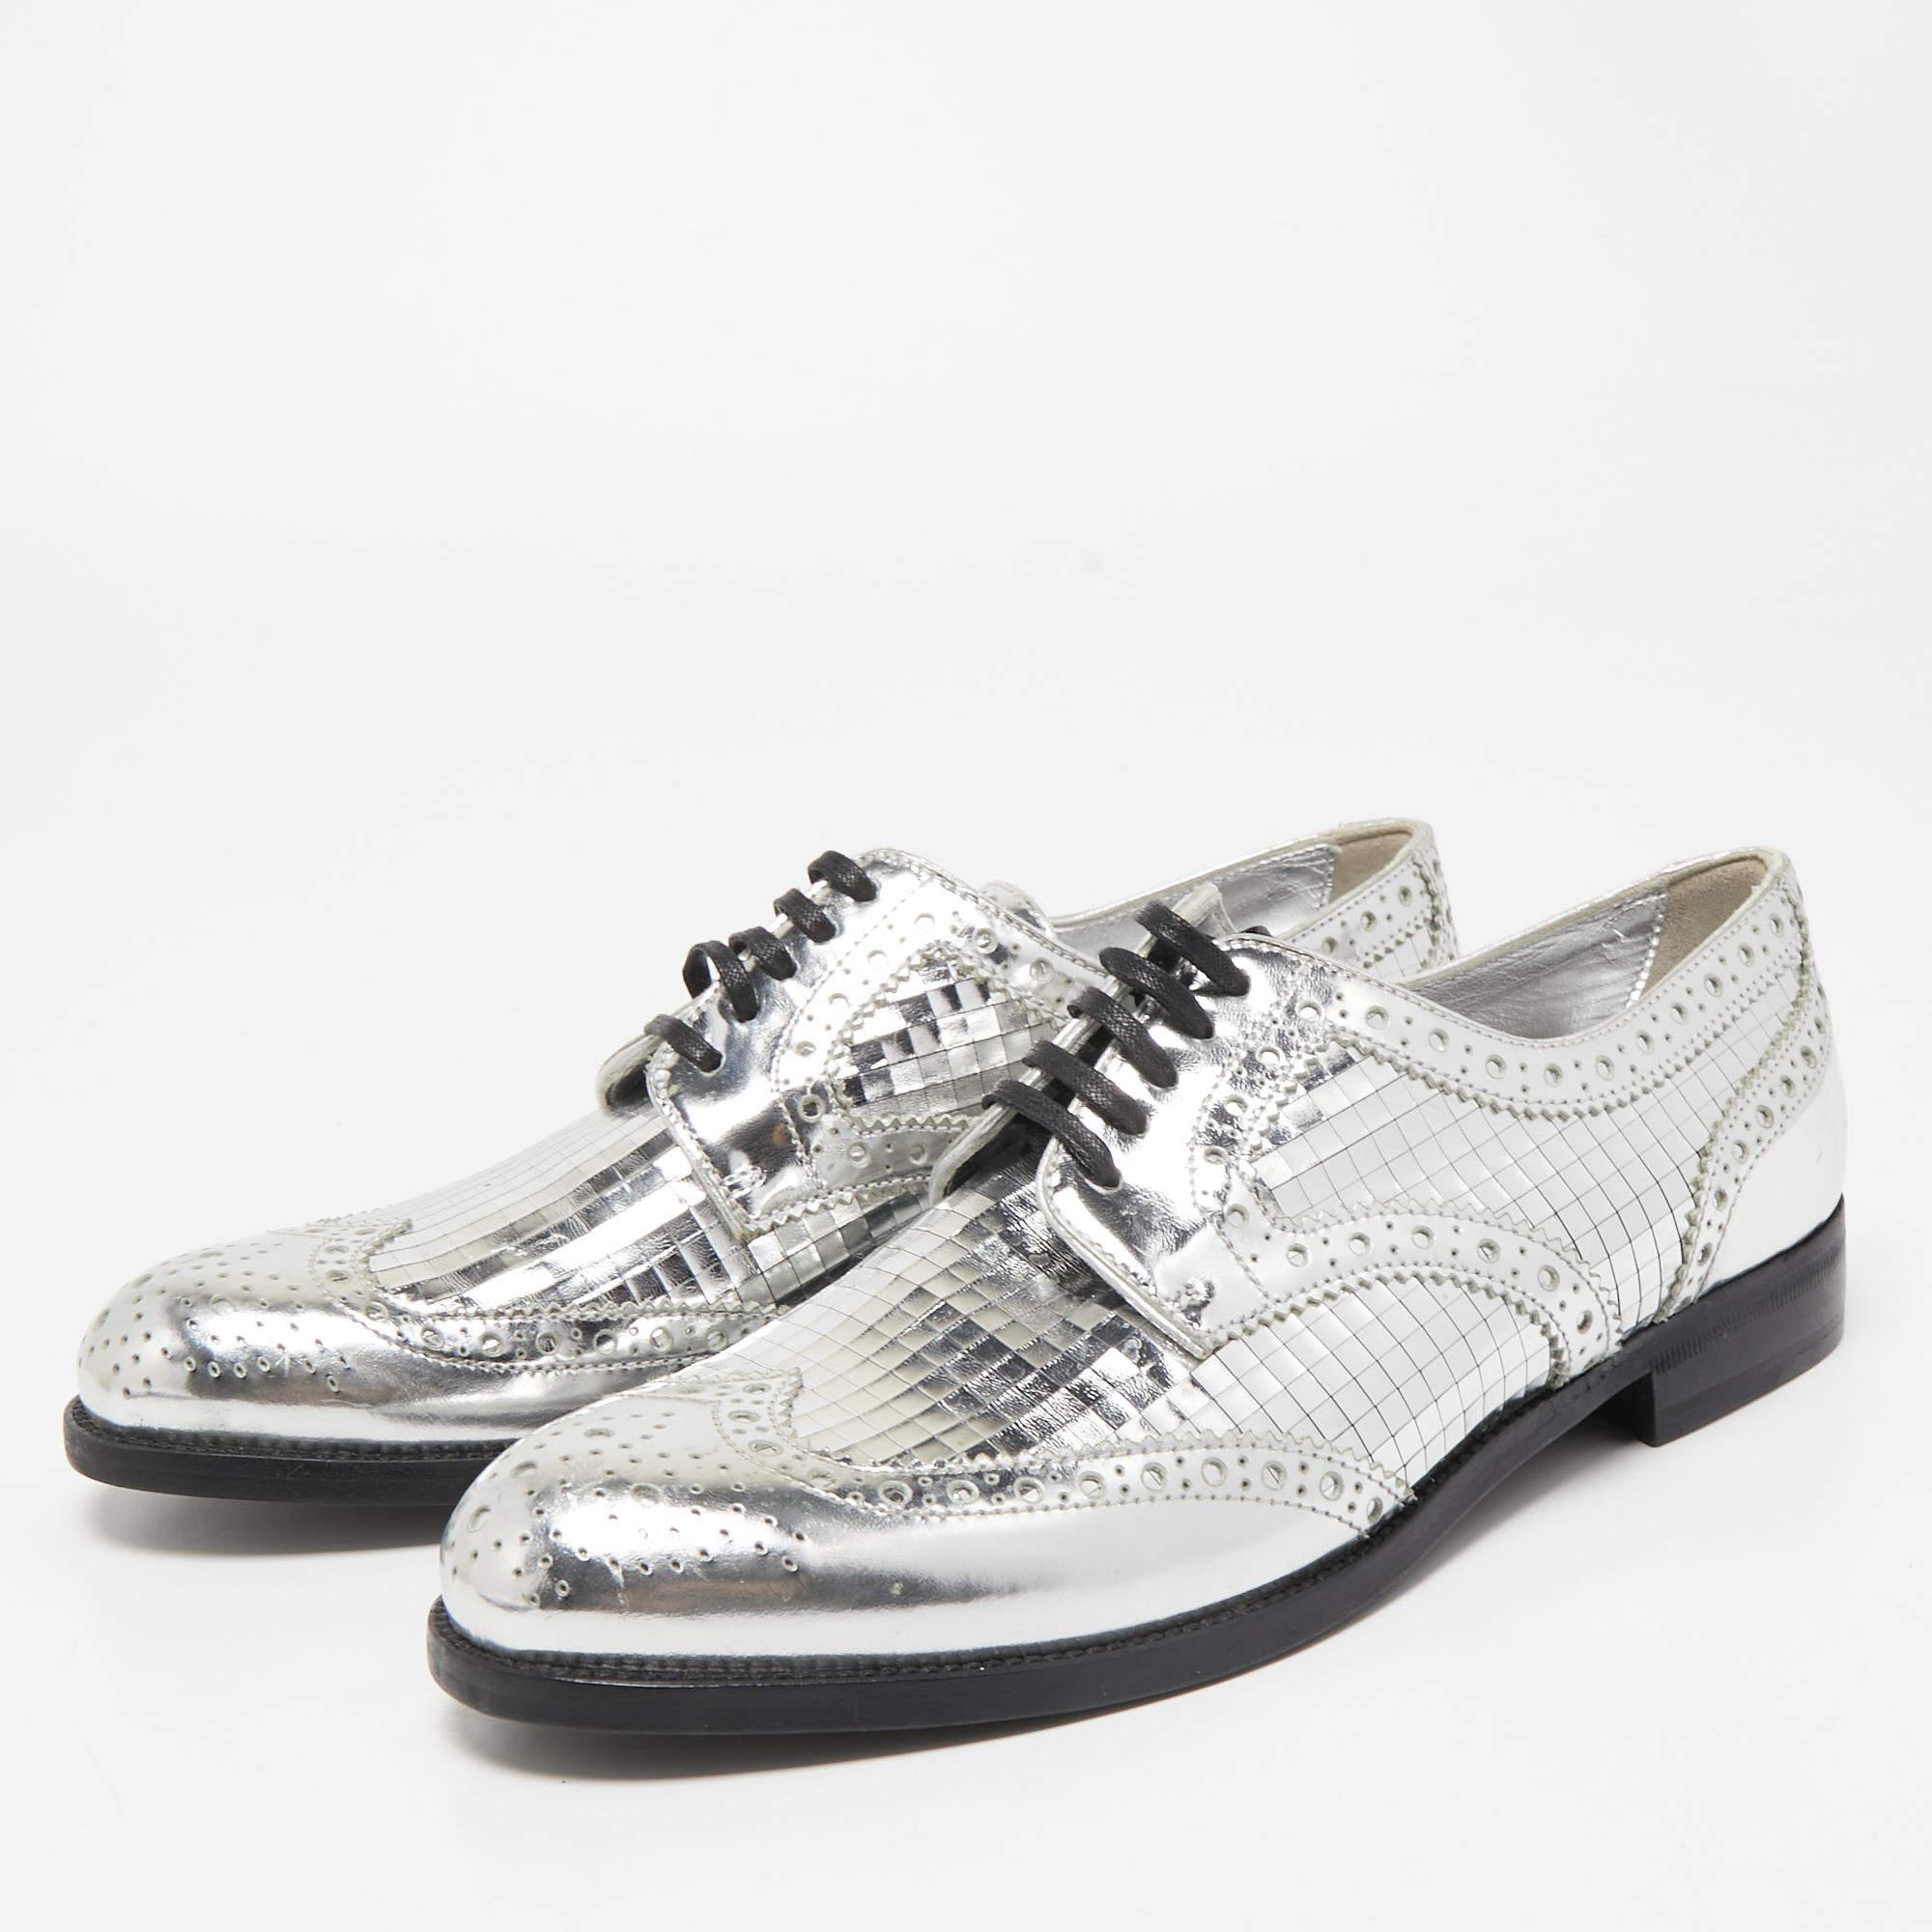 Dolce & Gabbana Silver Leather Disco Derby Brogues Size 38 4